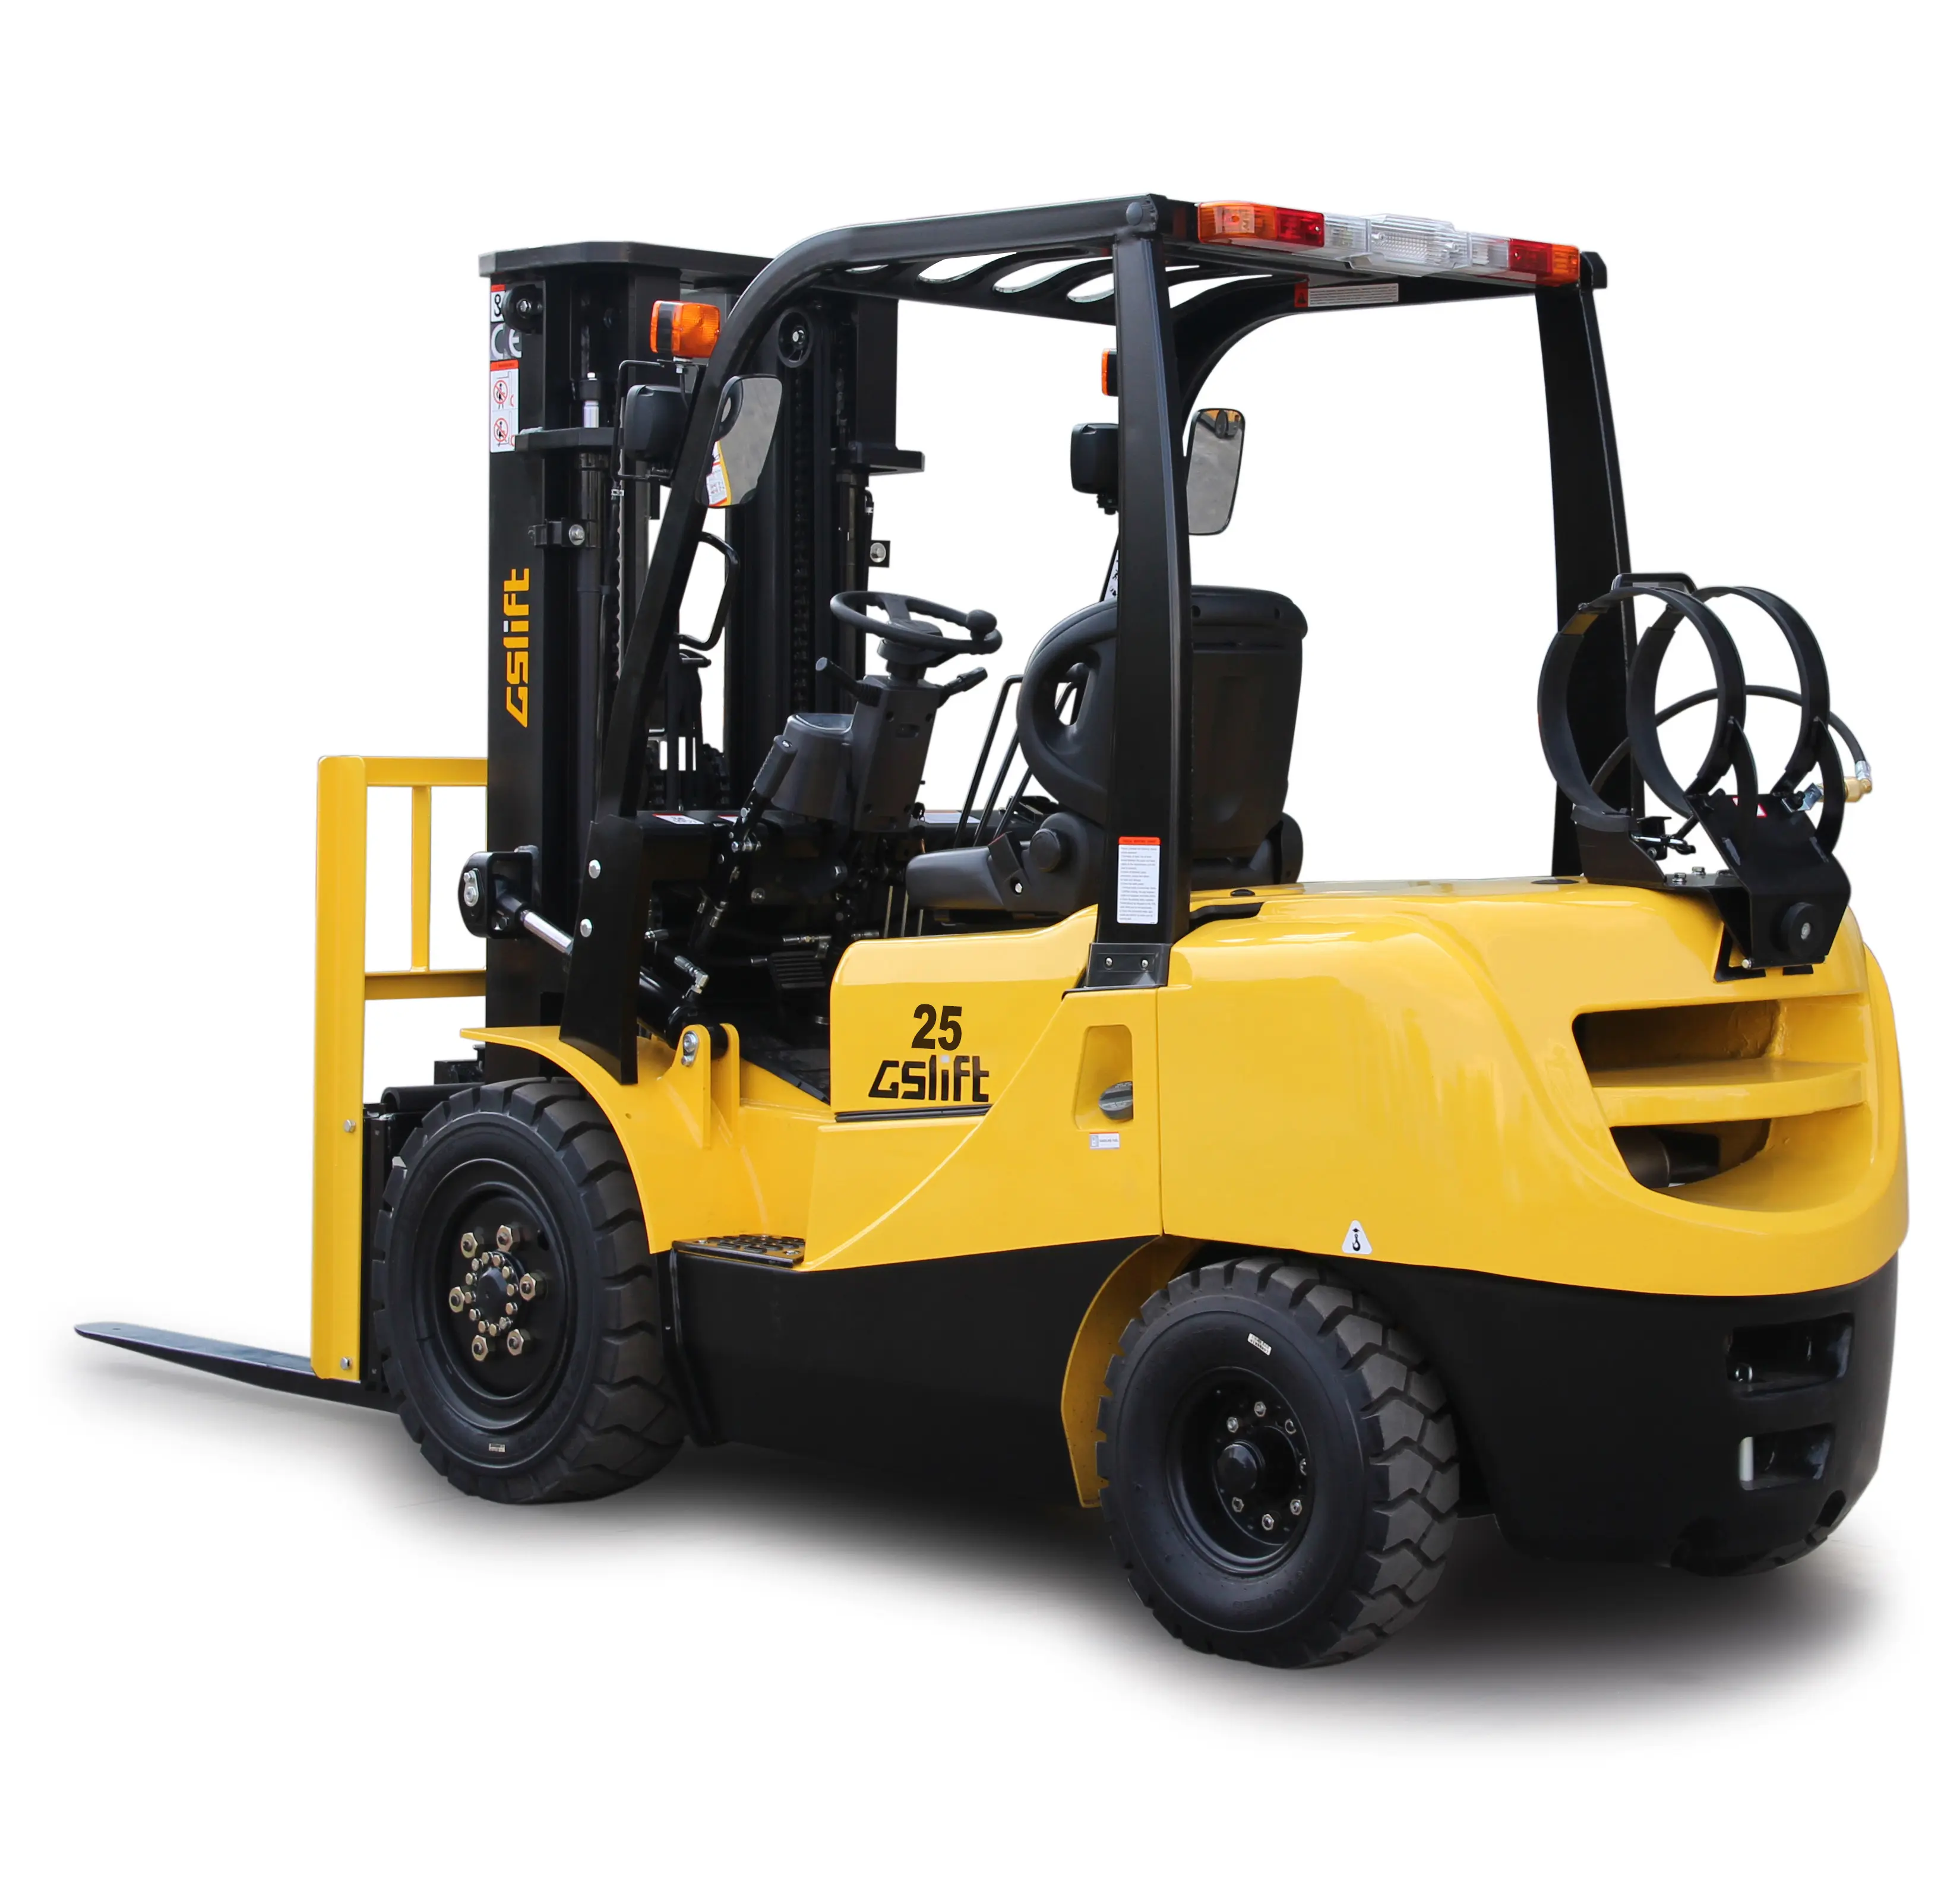 Japanese engine LPG gas forklift 3.5tons in new condition